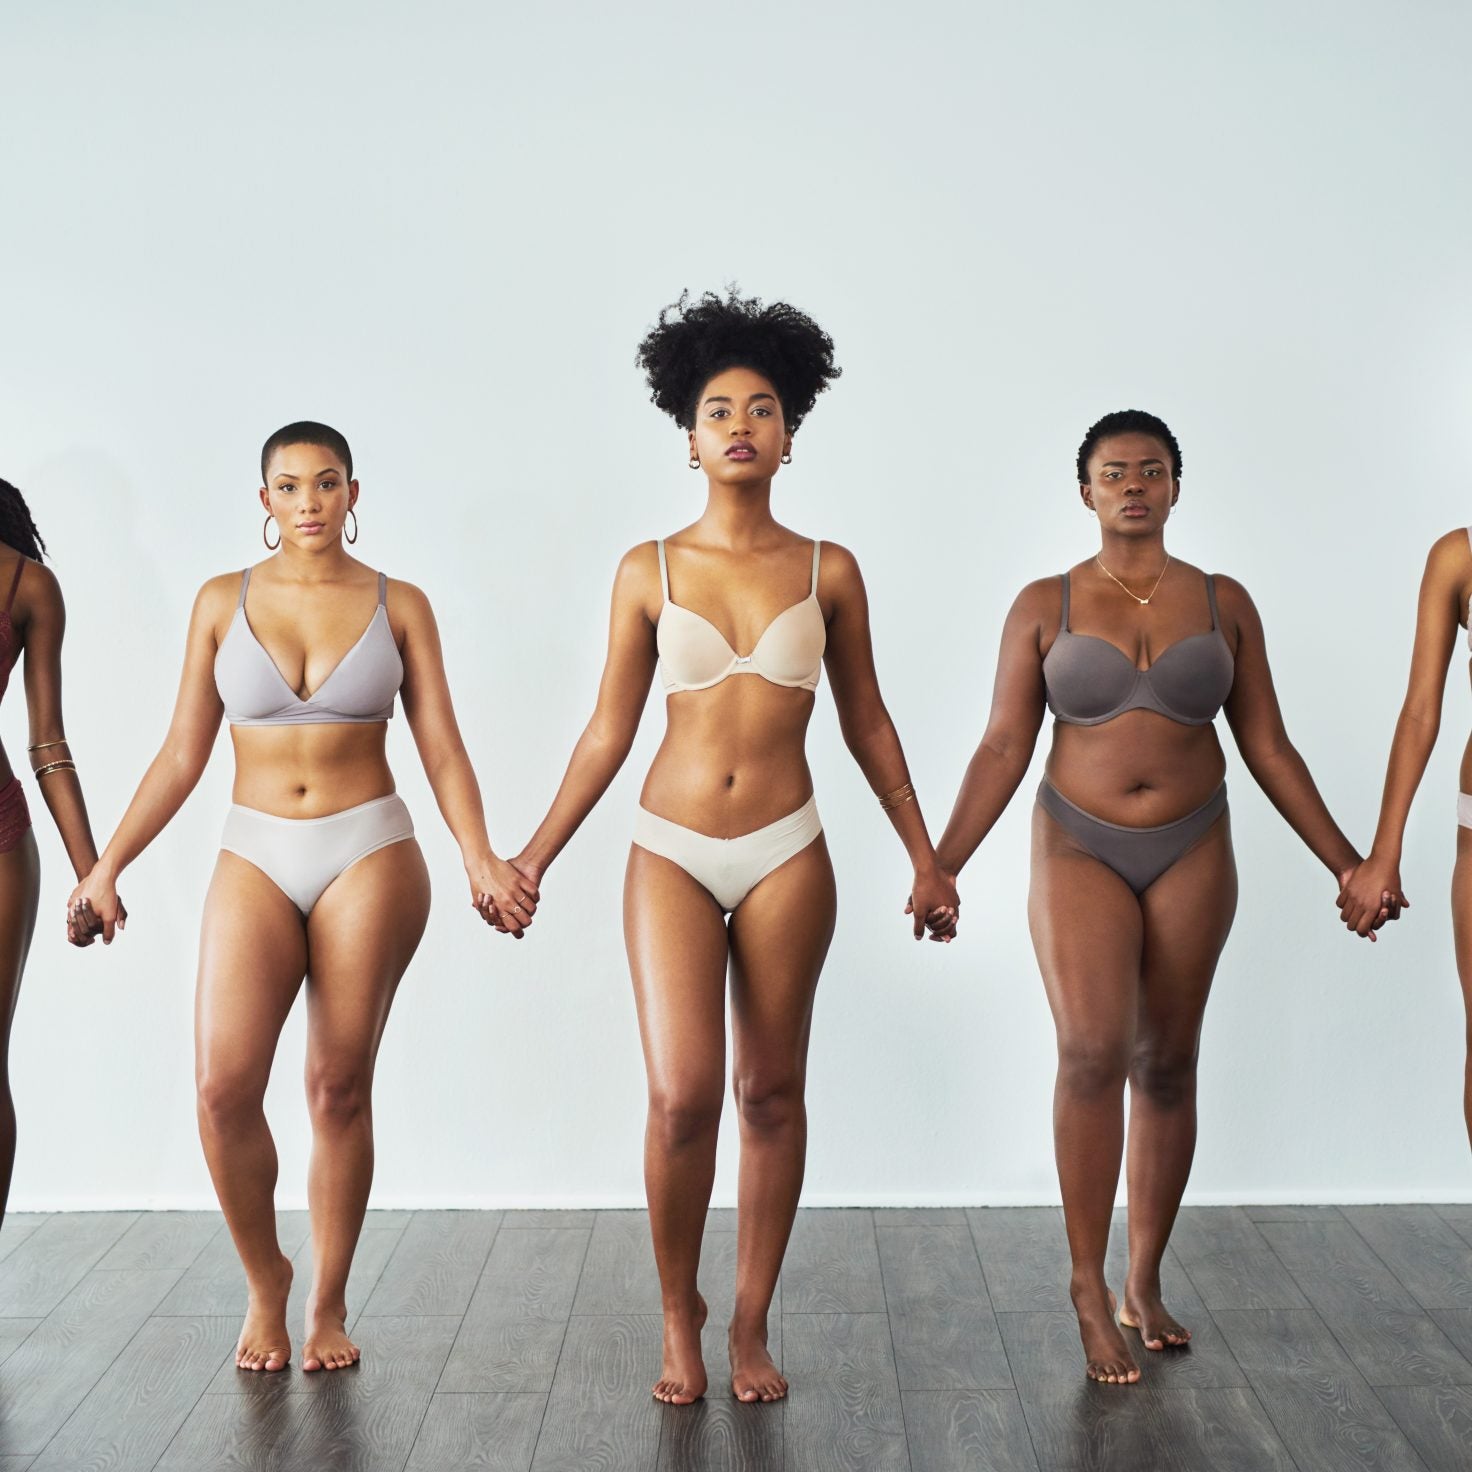 Why Is Body Positivity So Negative?